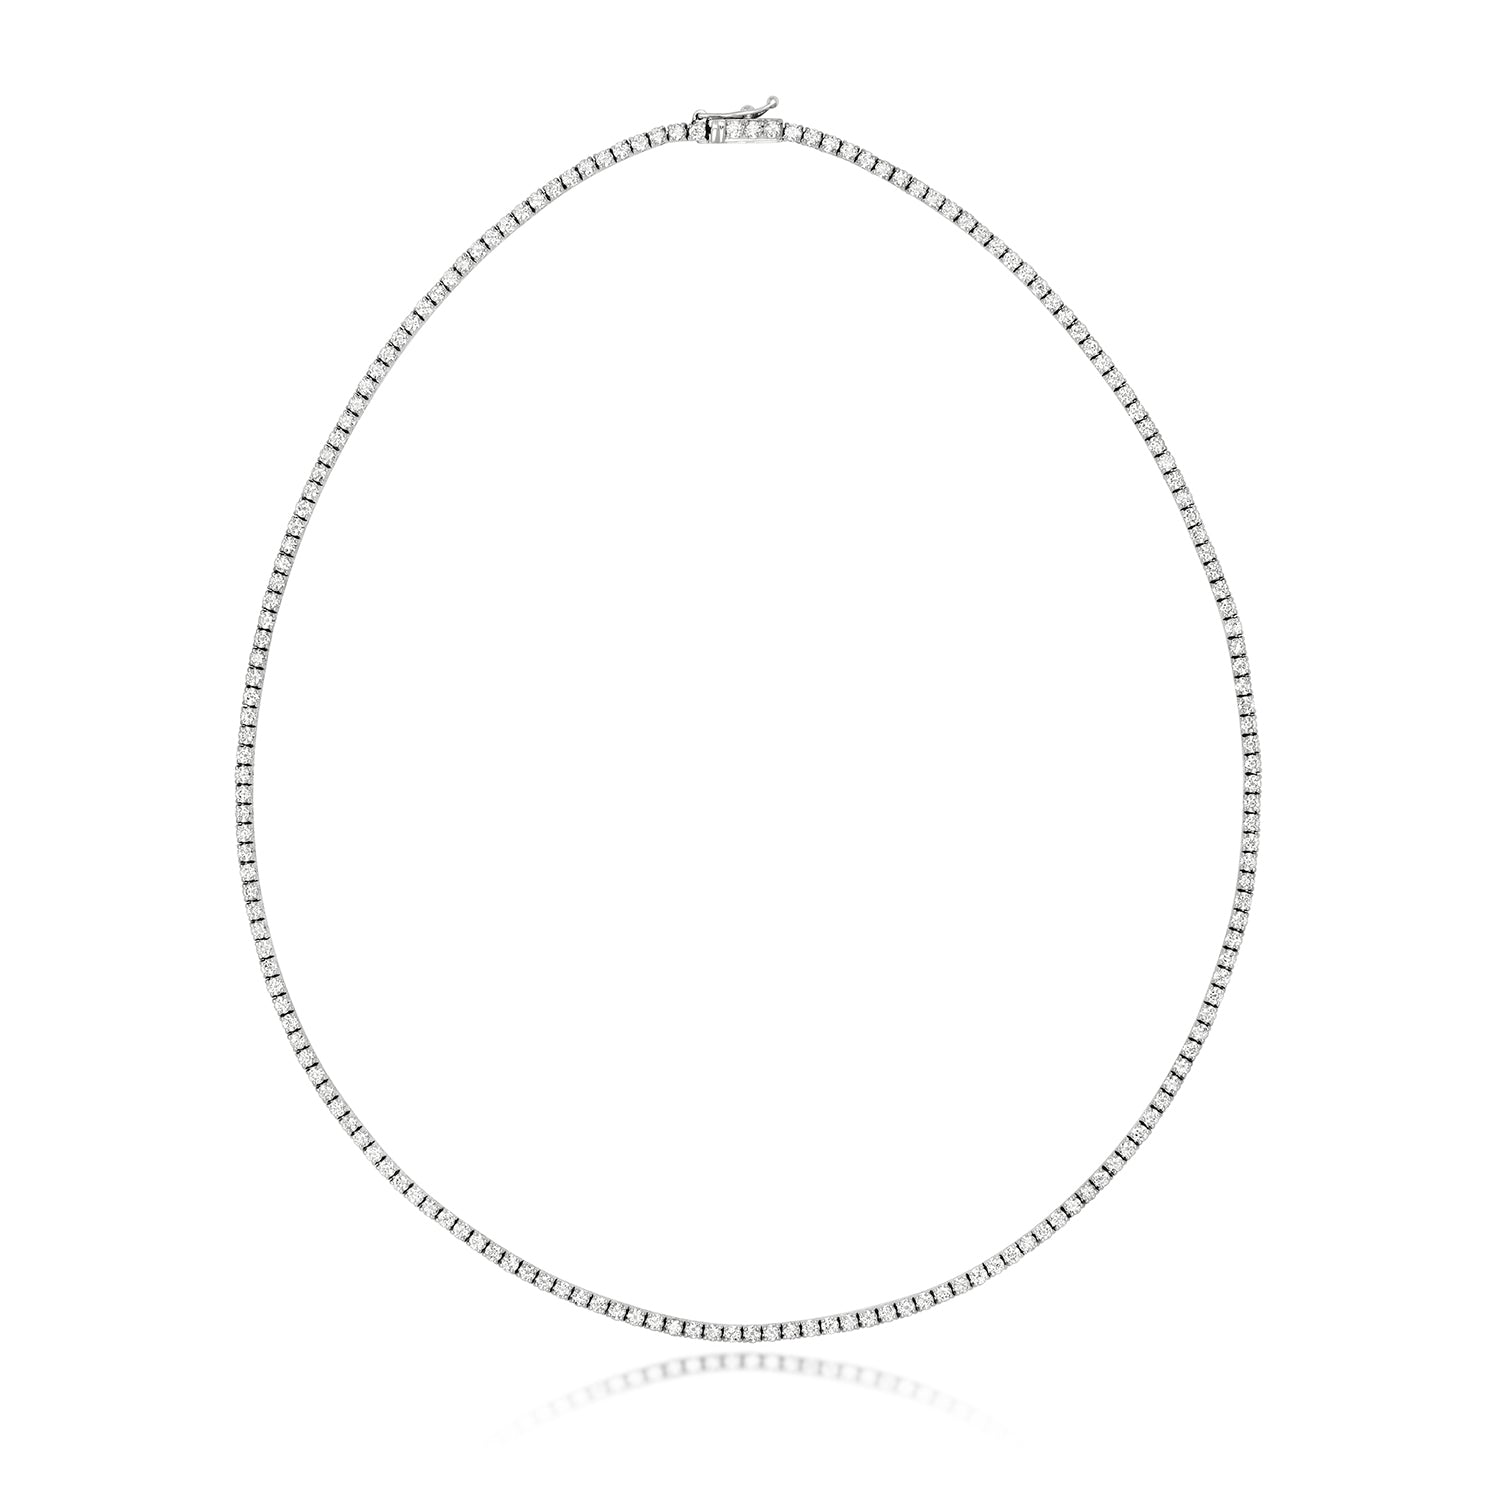 DIAMOND NECKLACE IN 18CT WHITE GOLD